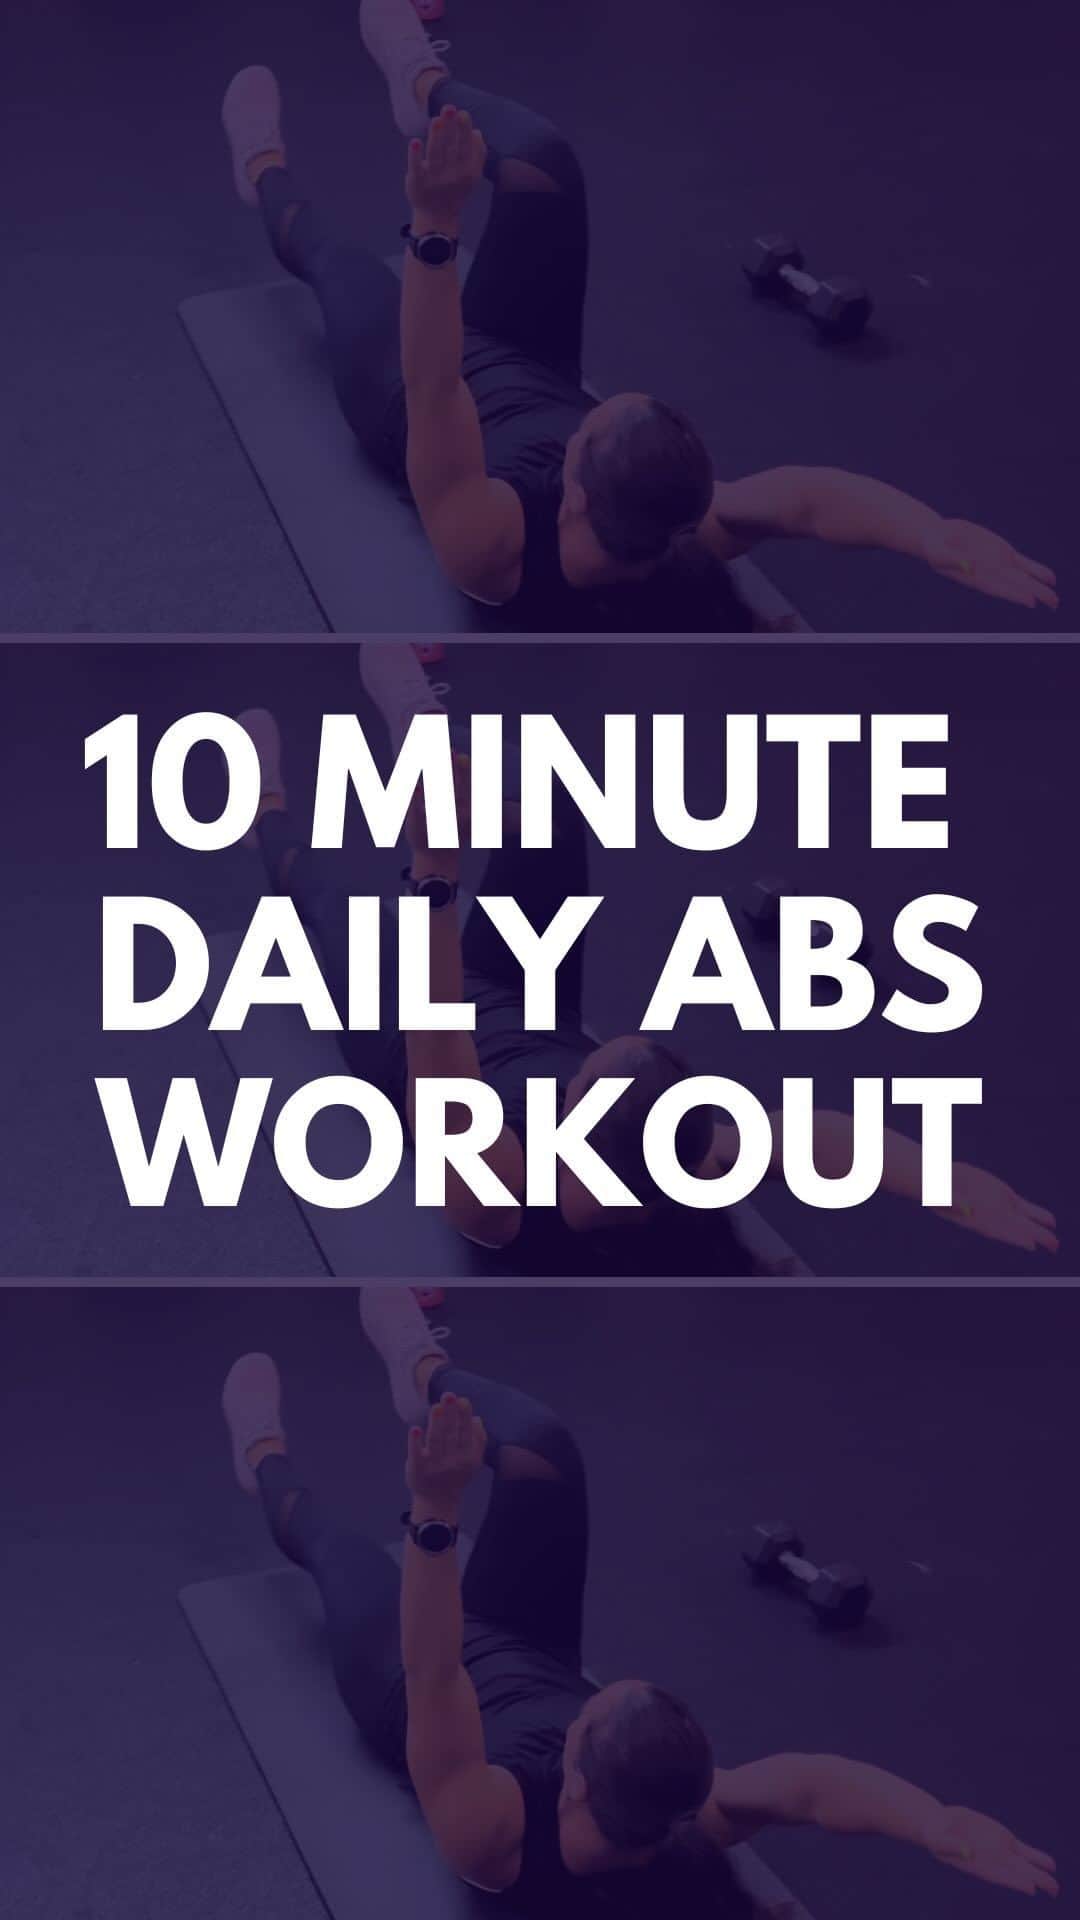 Camille Leblanc-Bazinetのインスタグラム：「Supplement your fitness routine with Feroce Daily Abs! 🔥For only $10/month you get access to 5 core complexes each week that will sculpt and strengthen your abdominals in 10 minutes or less.  Daily Abs Day 3 Workout:  Complete 3 sets of…  10 deadbugs 20 flutter kicks  MAX hollow hold  Rest 1 min between sets.   10 minutes. 0 excuses. LET’S GO🔥🔥🔥」